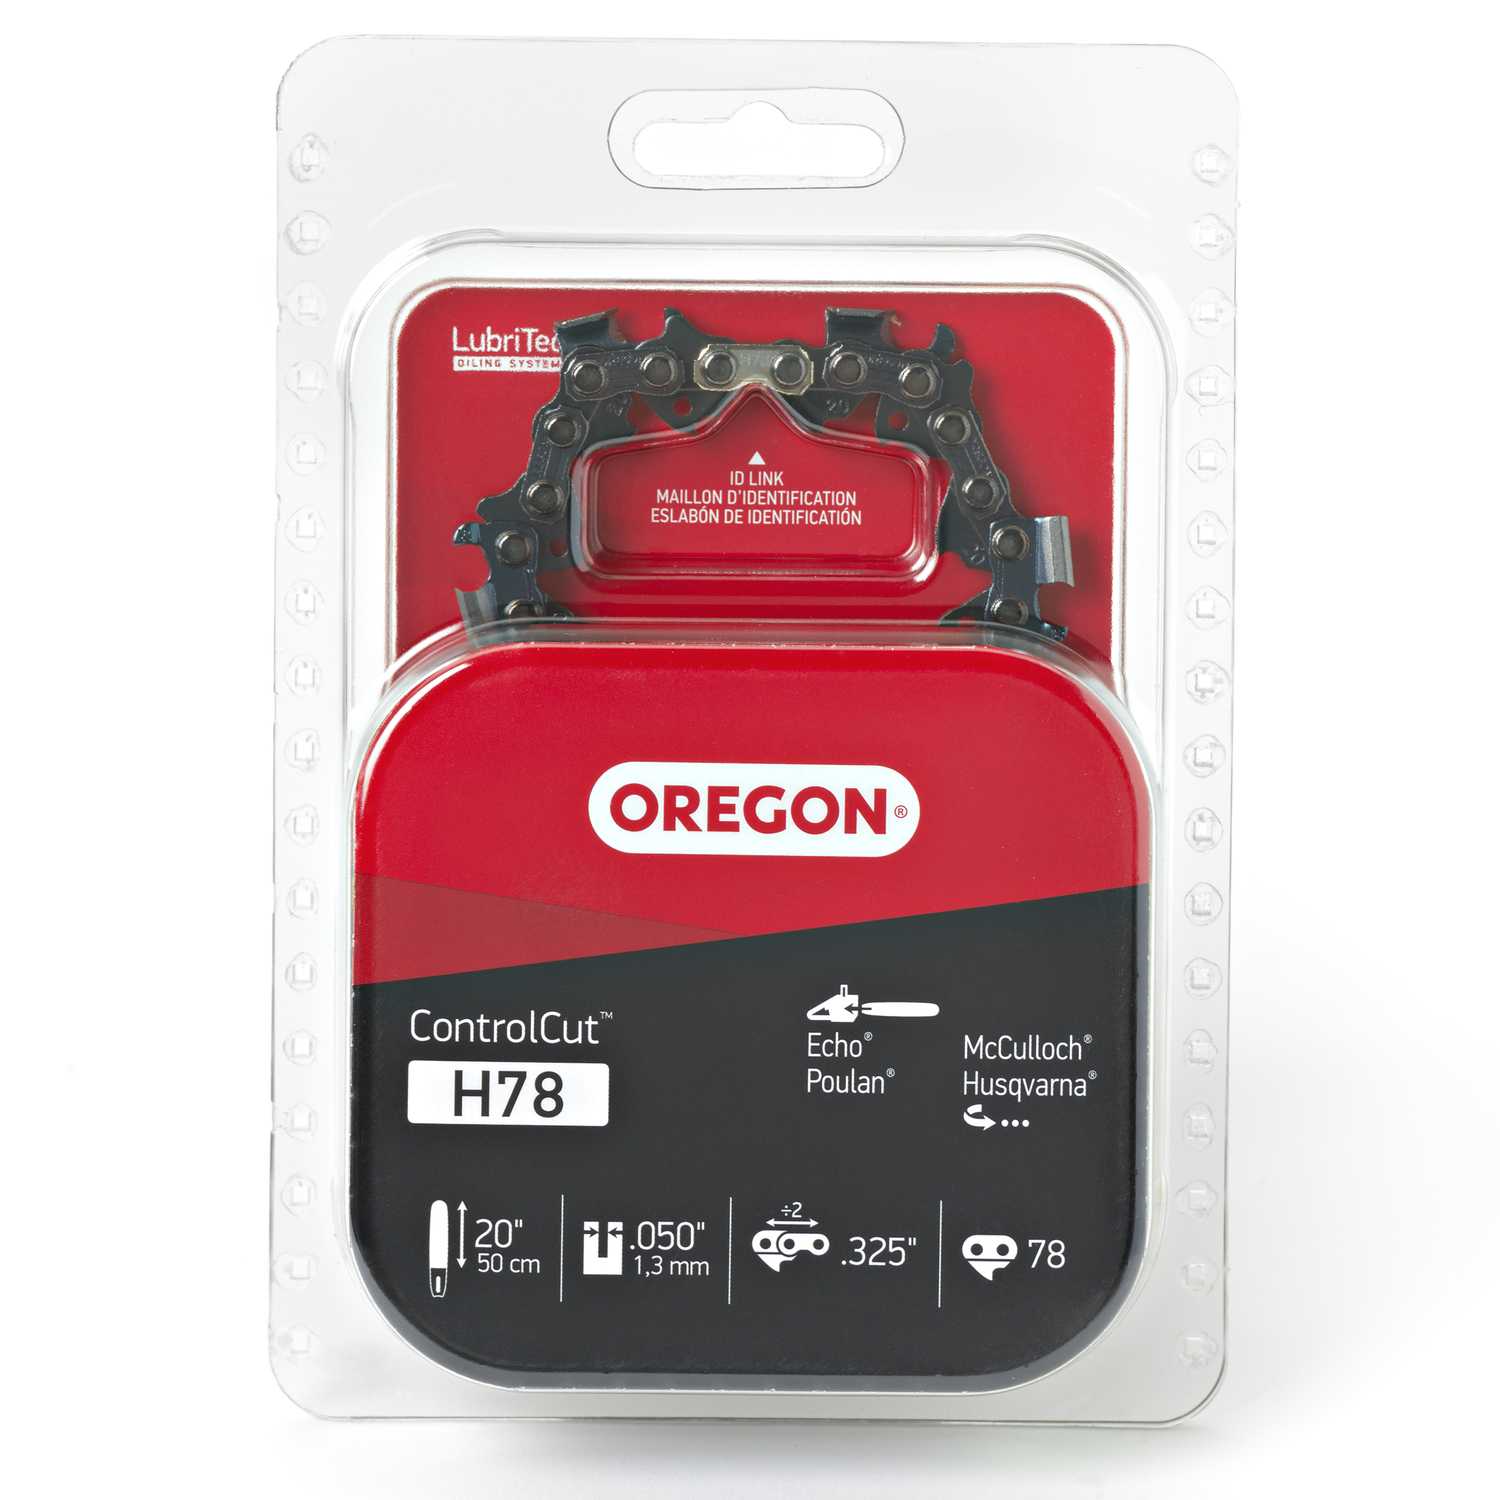 Oregon Control Cut 20 in. 78 links Chainsaw Chain Ace